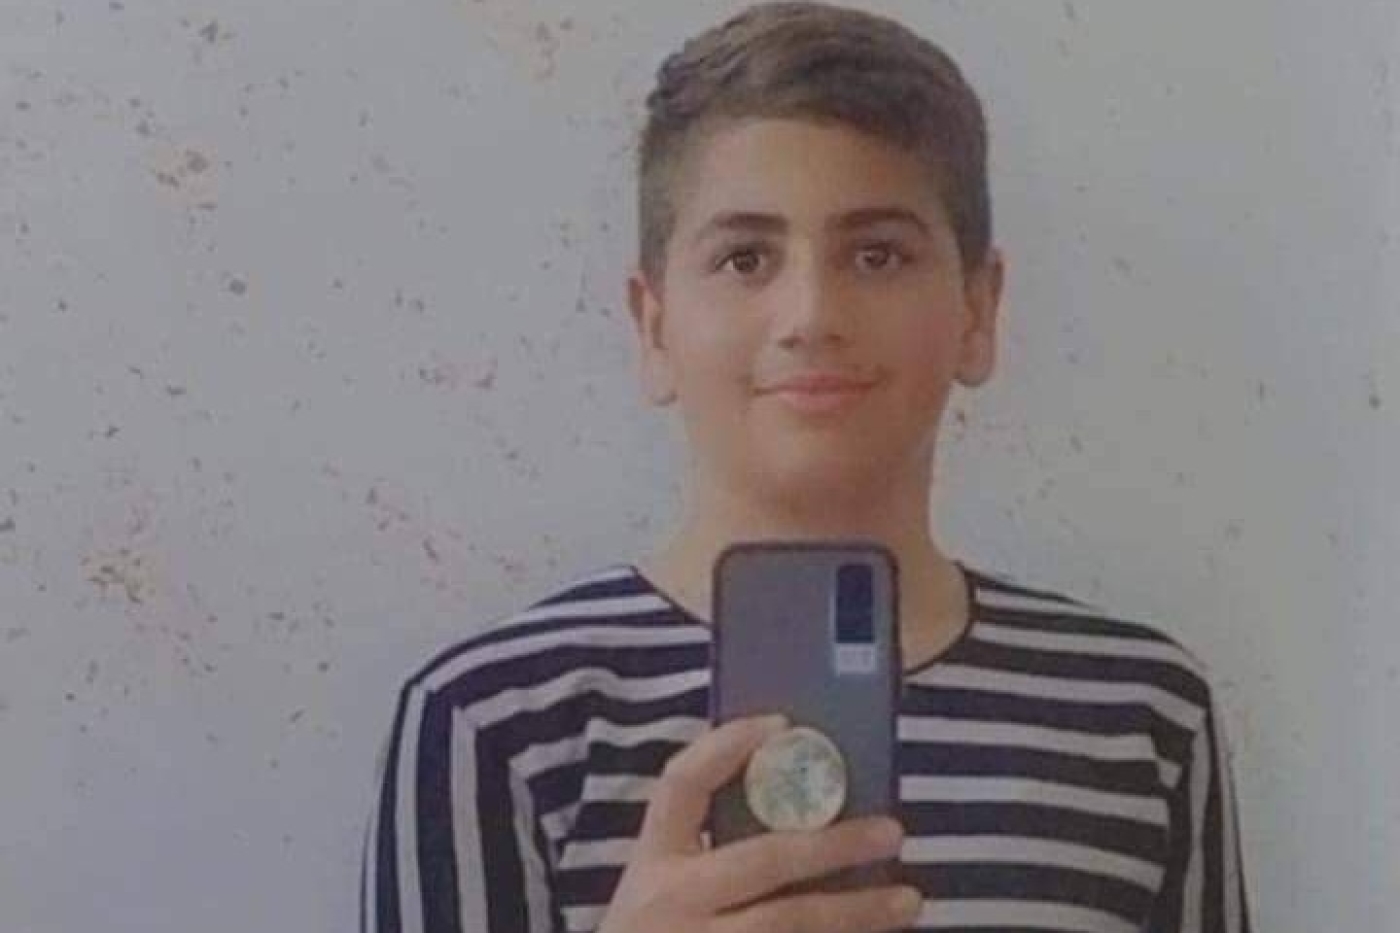 Zayd Mohammed Ghouneim, 15, was fatally shot by Israeli forces in near the occupied West Bank city of Bethlehem on 27 May 2022. (Twitter)